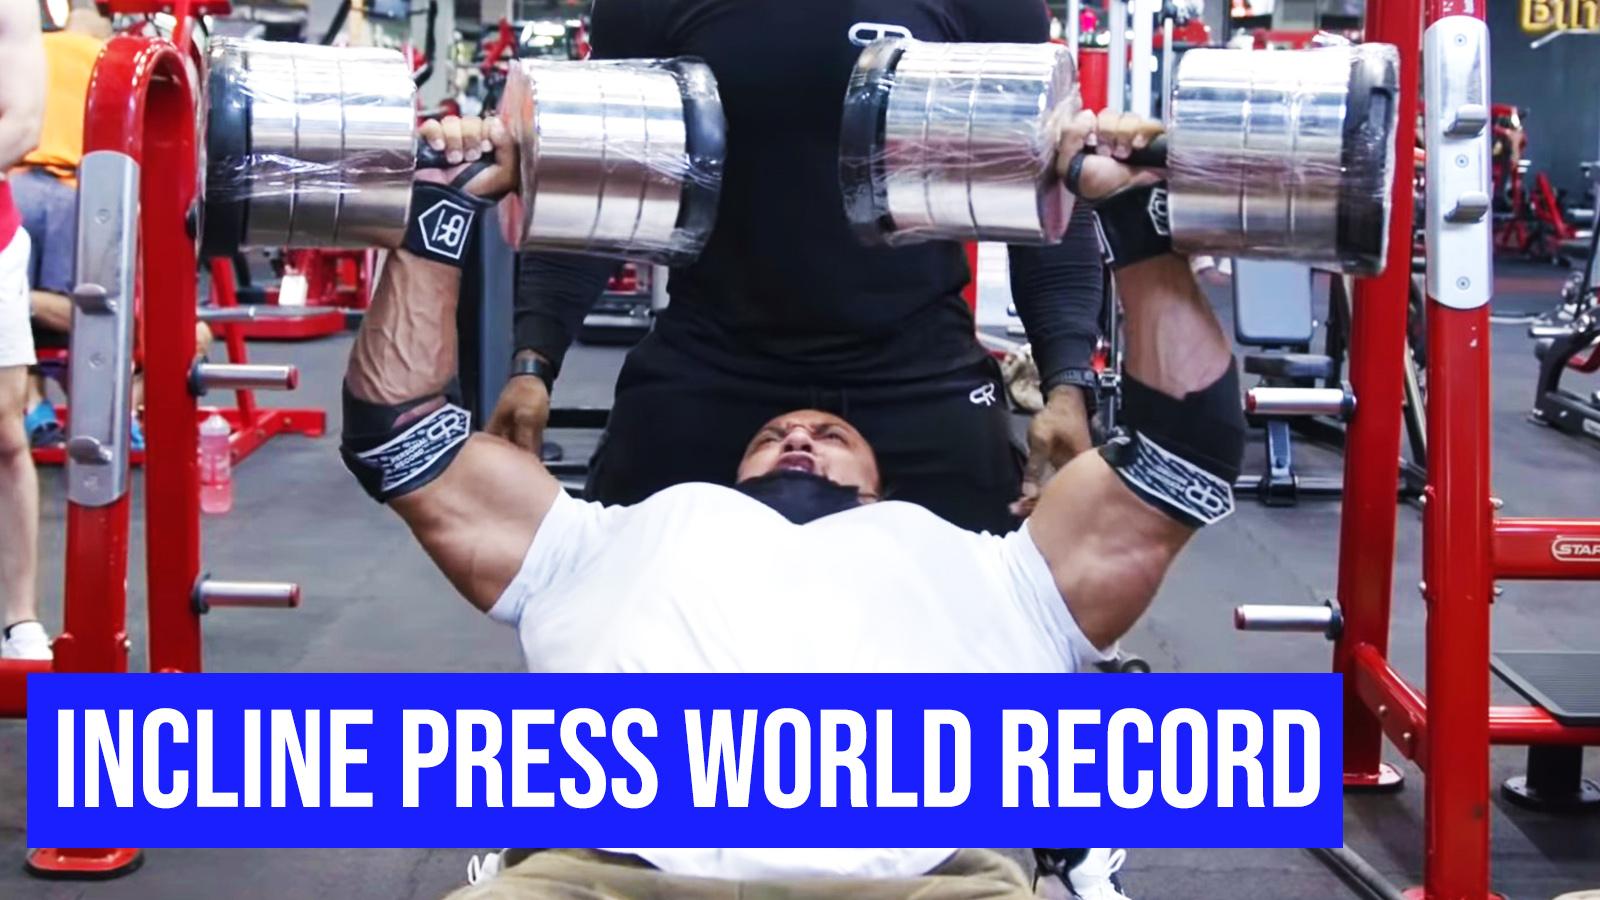 Larry Wheels pressing 242 lbs for reps.